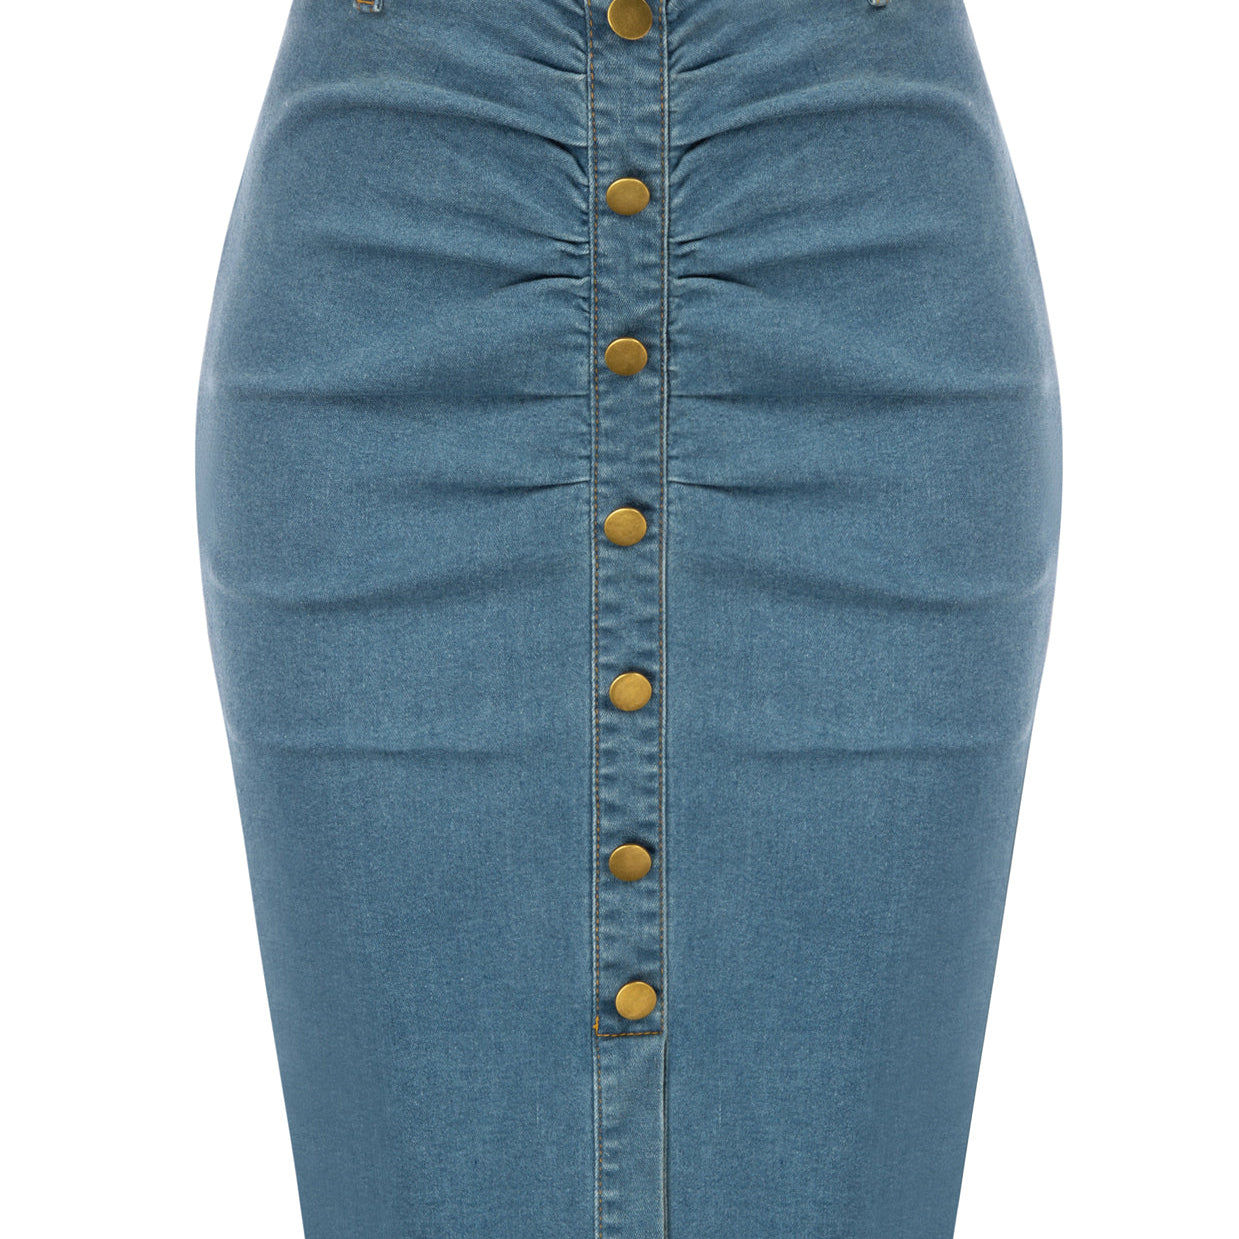 Influencer Vintage Jean Skirt with Belt High Waist Ruched Front Bodycon Skirt